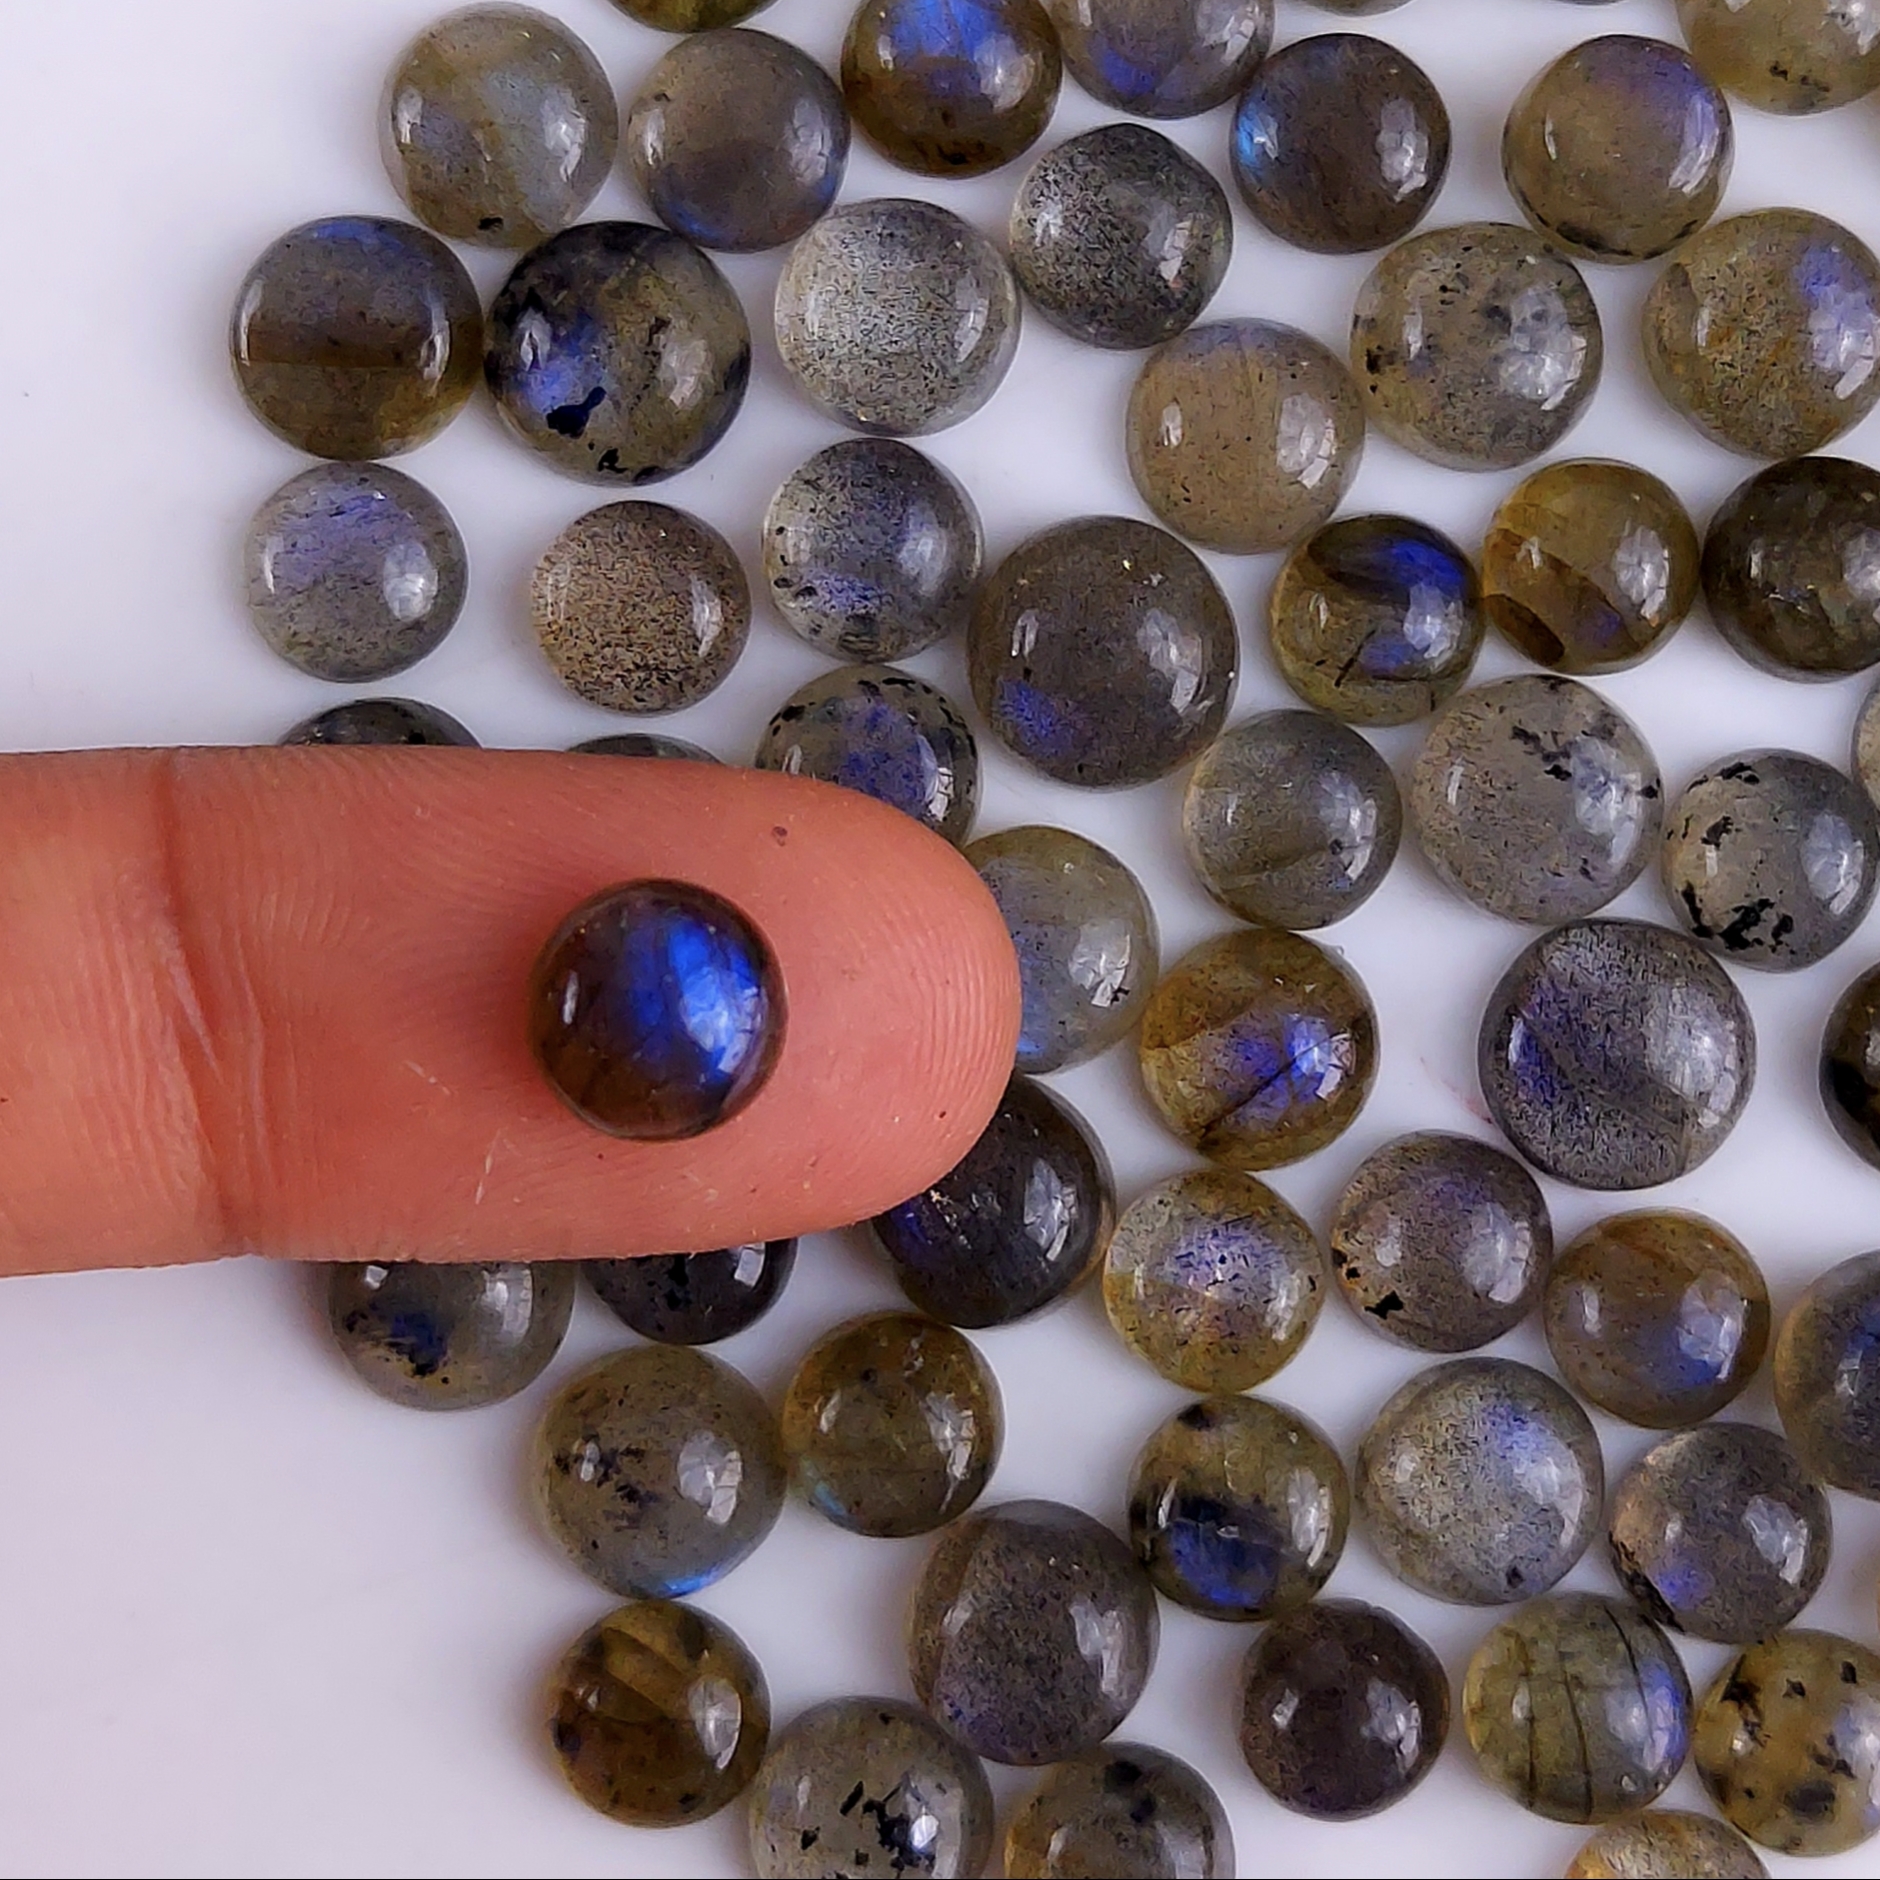 74Pcs 180Cts Natural Blue Labradorite Calibrated Cabochon Round Shape Gemstone Lot For Jewelry Making 6x6mm#741